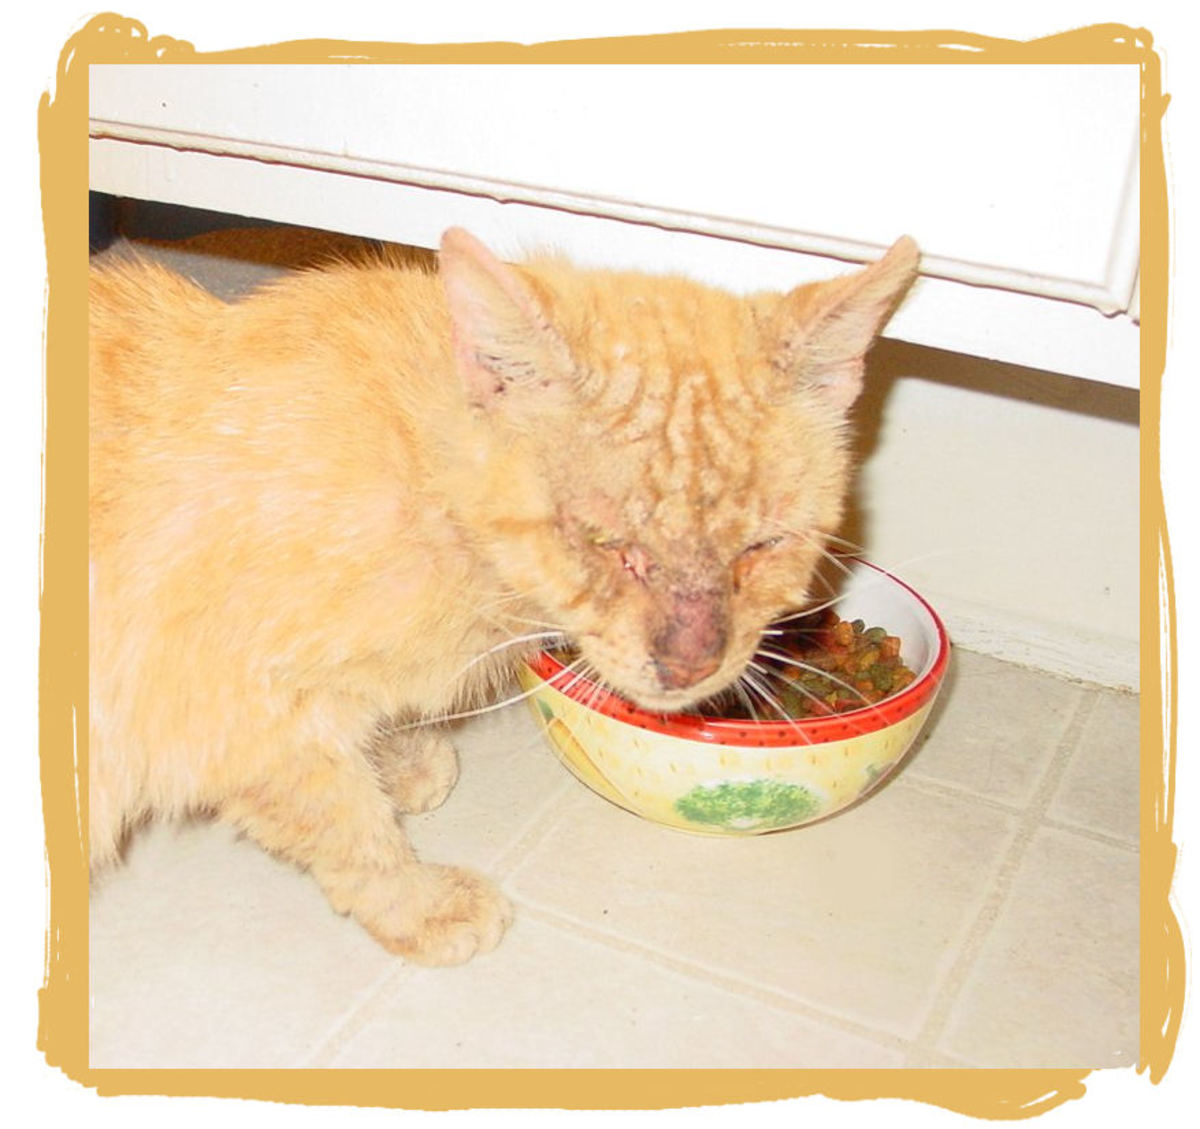 Tommy looks pretty rough here, but he was still a sweet kitty. He was experiencing a lot of discomfort but luckily he still had an appetite.